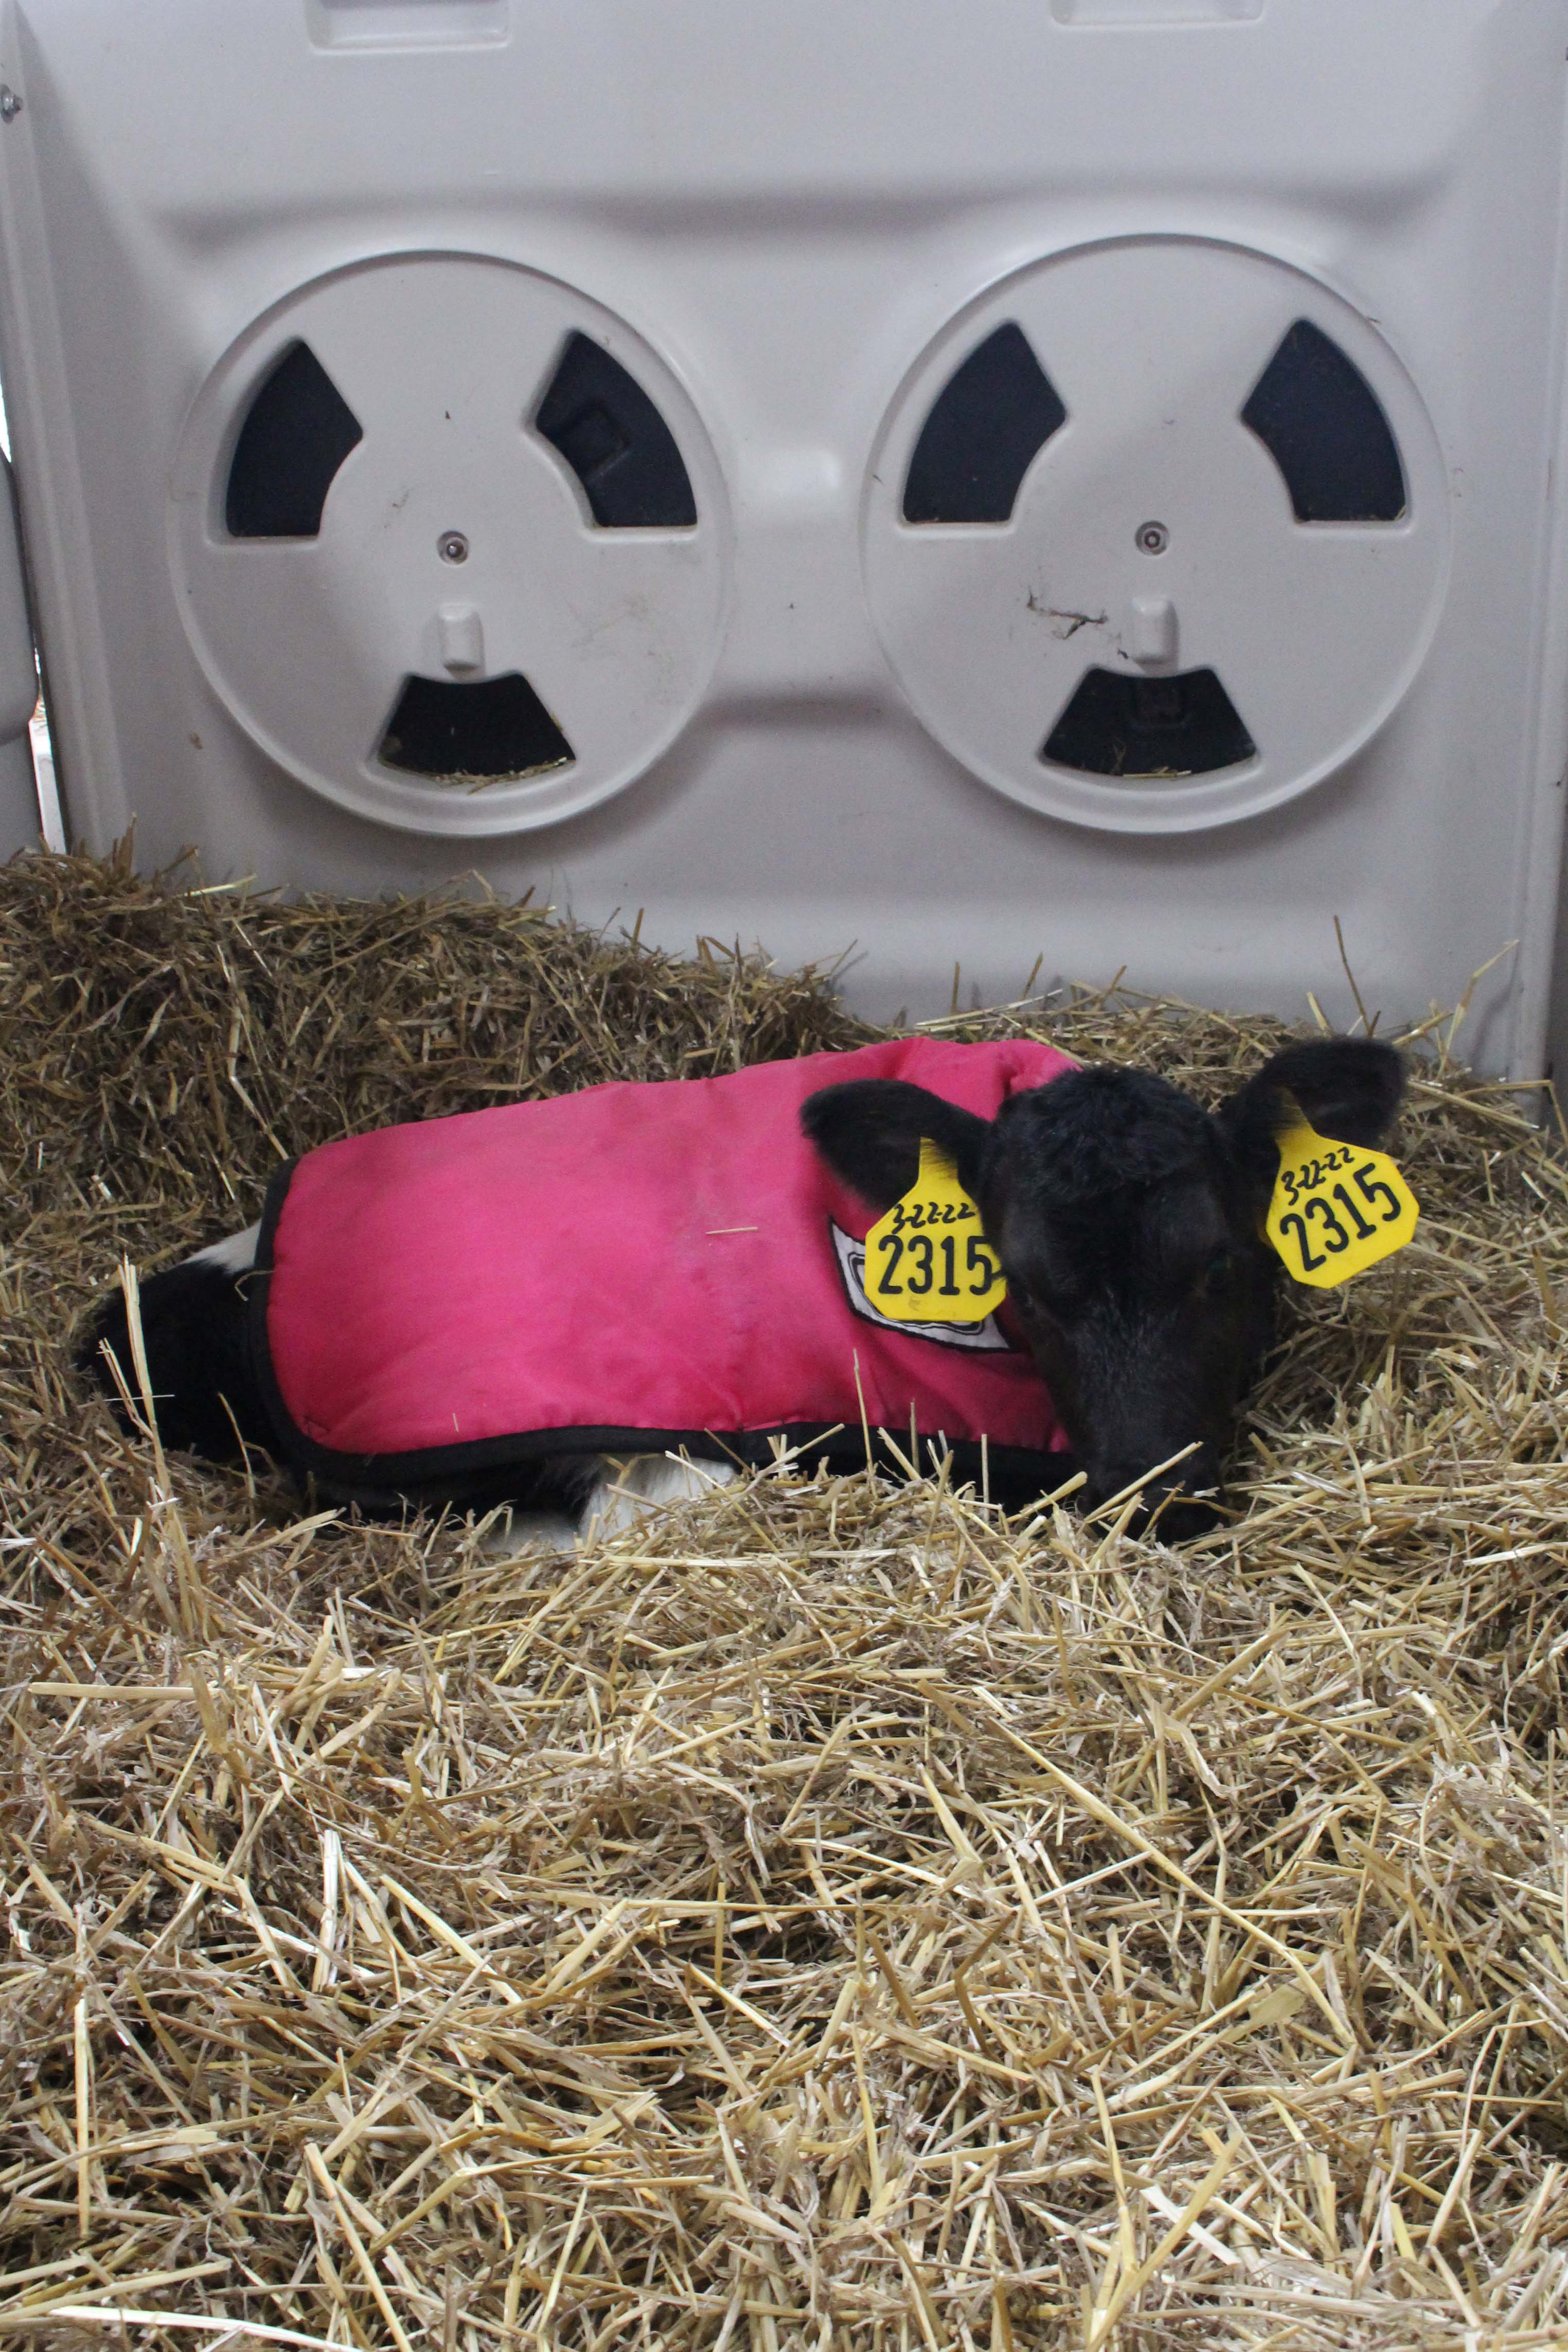 Day-old calves are placed in backgrounding pens for two weeks. Ryan Loehr, who manages the calf program, said they’ve had better success in terms of calf health and performance when using a two-week backgrounding program versus one week.